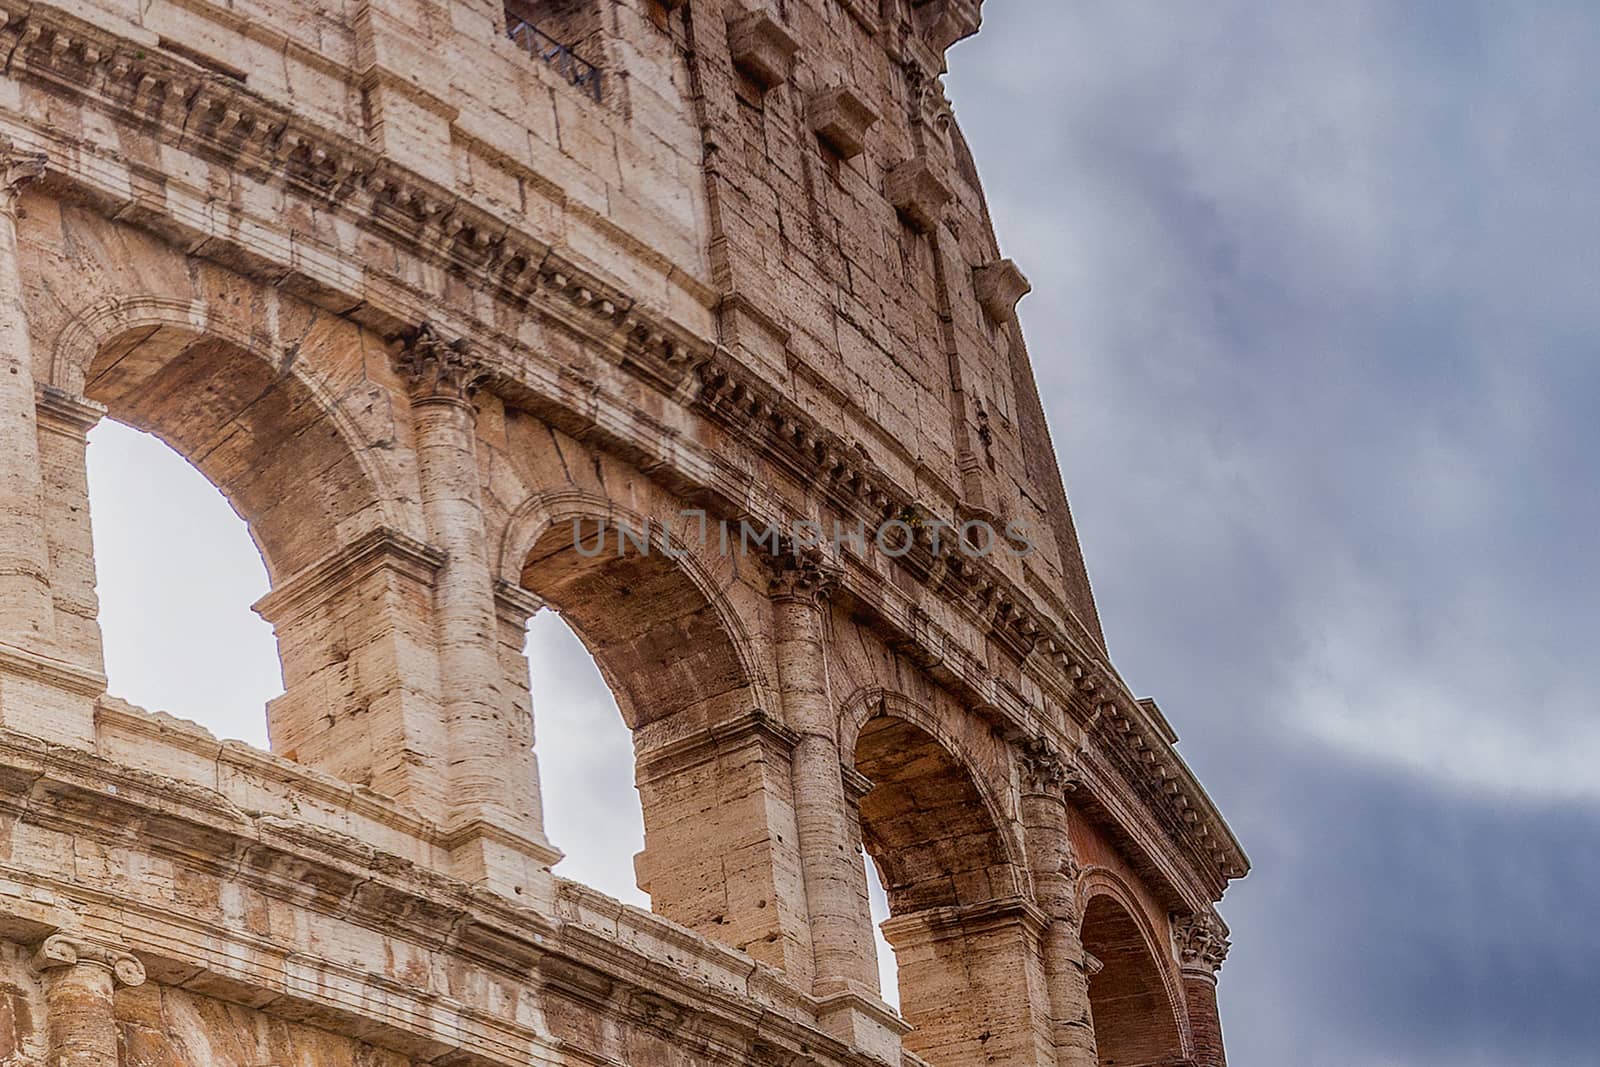 architectural detail of the colosseum in Rome